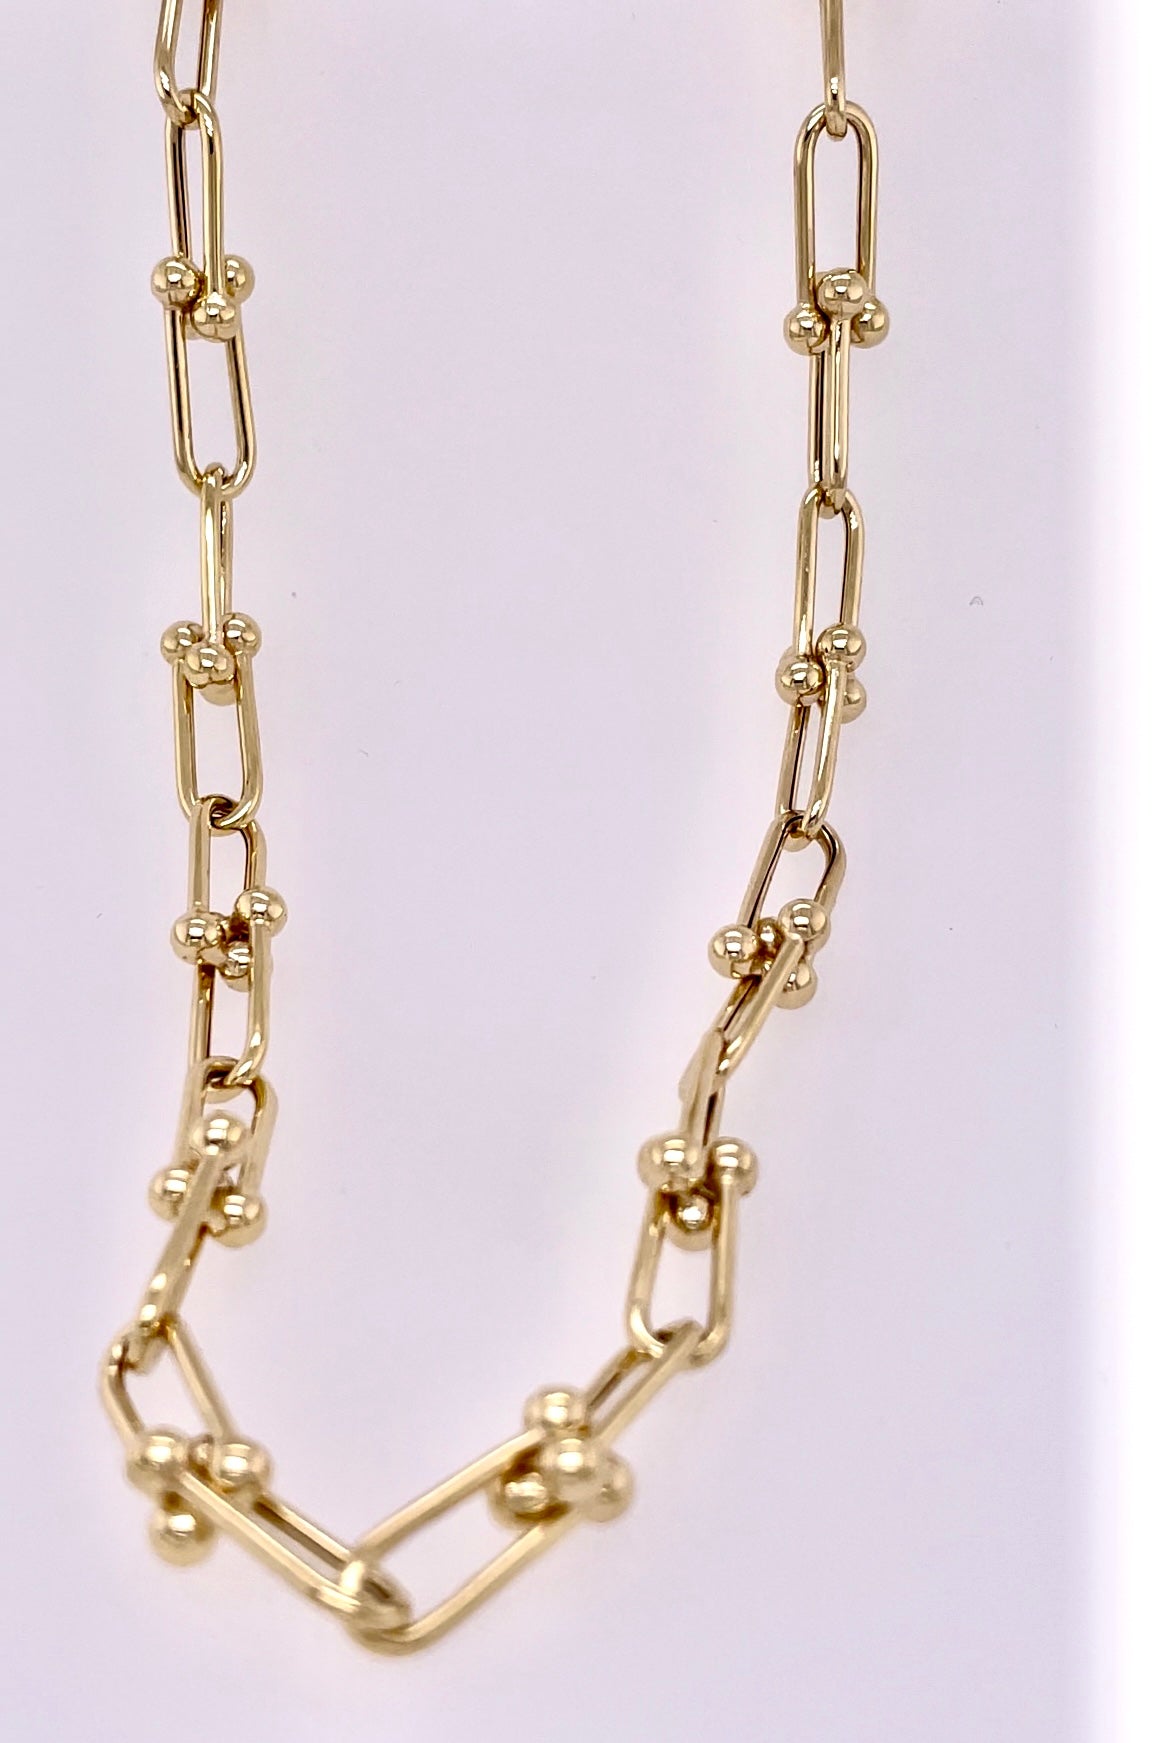 Tiffany Inspired Ball and Chain Necklace Gold – Jain Jewelry Network